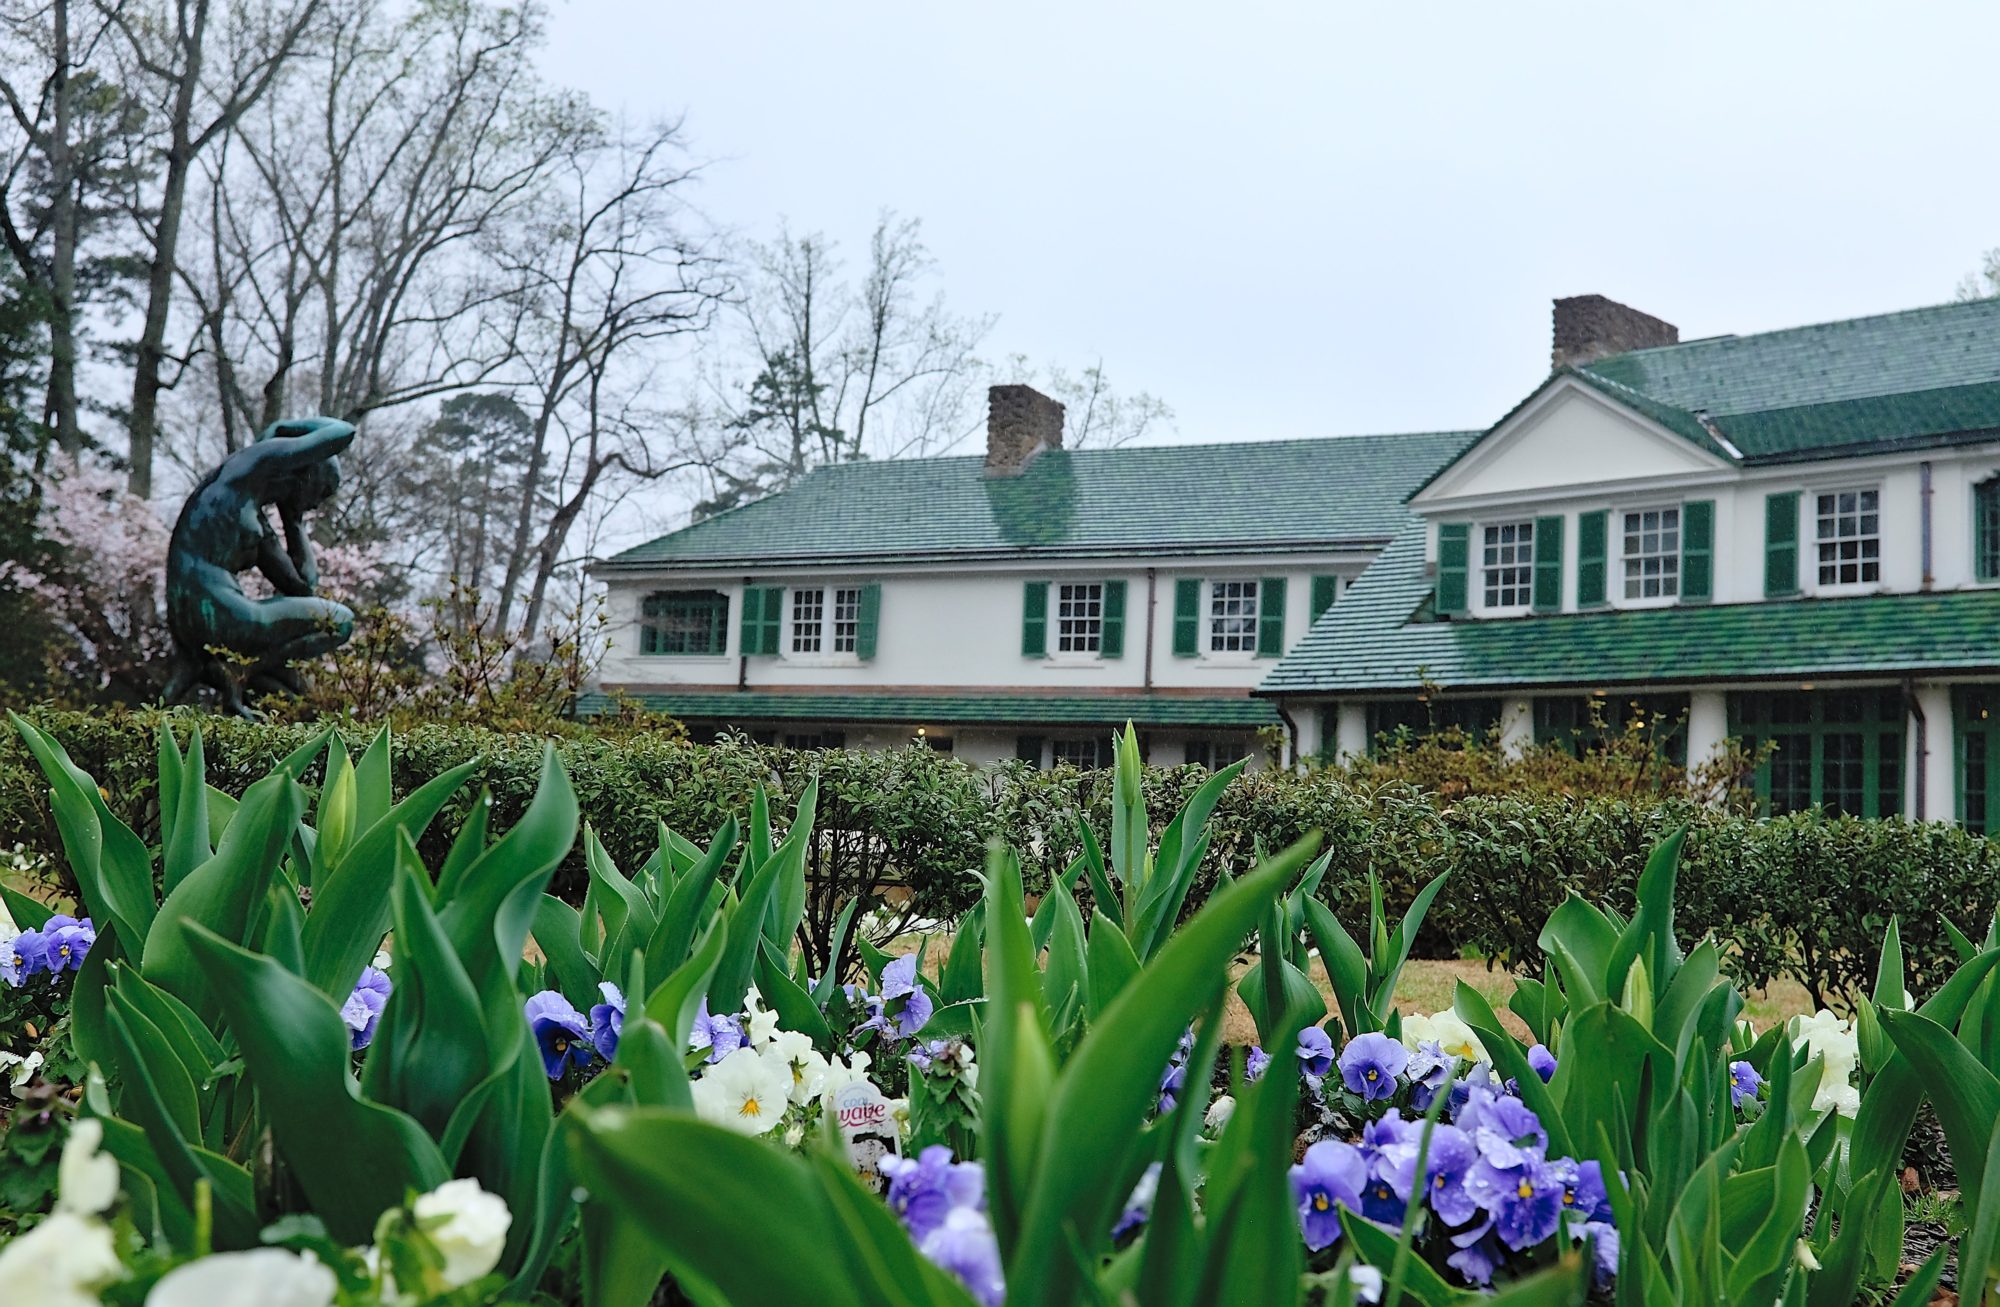 Reynolda House is visible through a patch of flowers